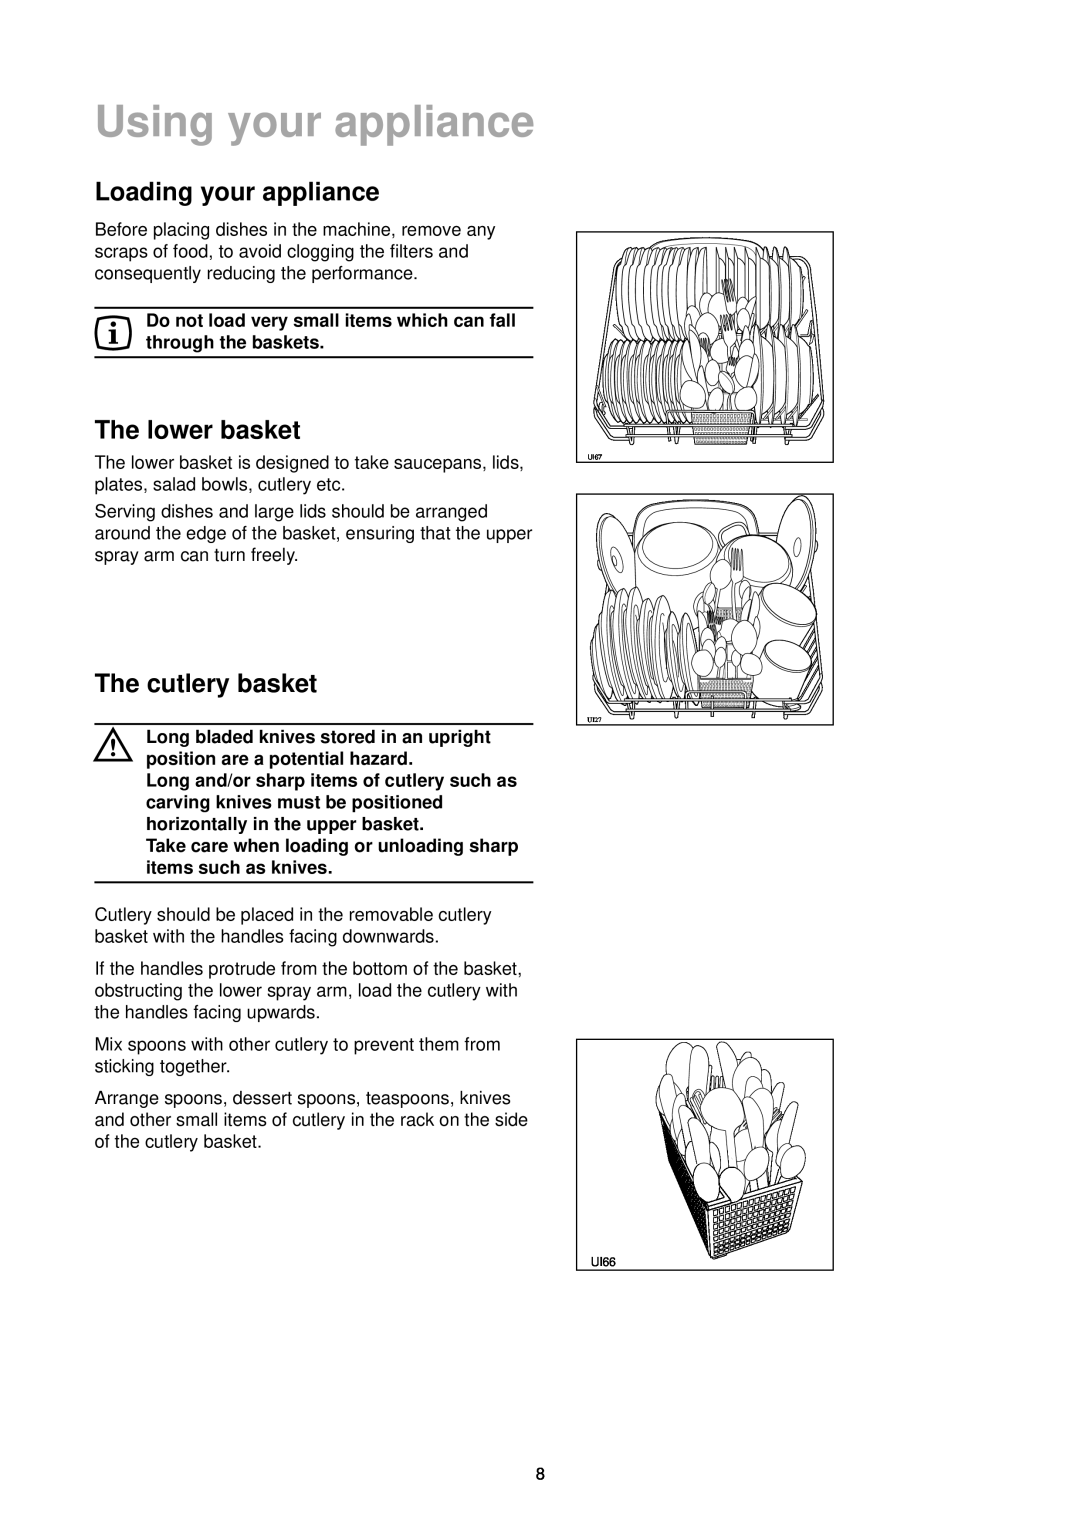 Tricity Bendix DH 101 manual Using your appliance, Loading your appliance, The lower basket, The cutlery basket 